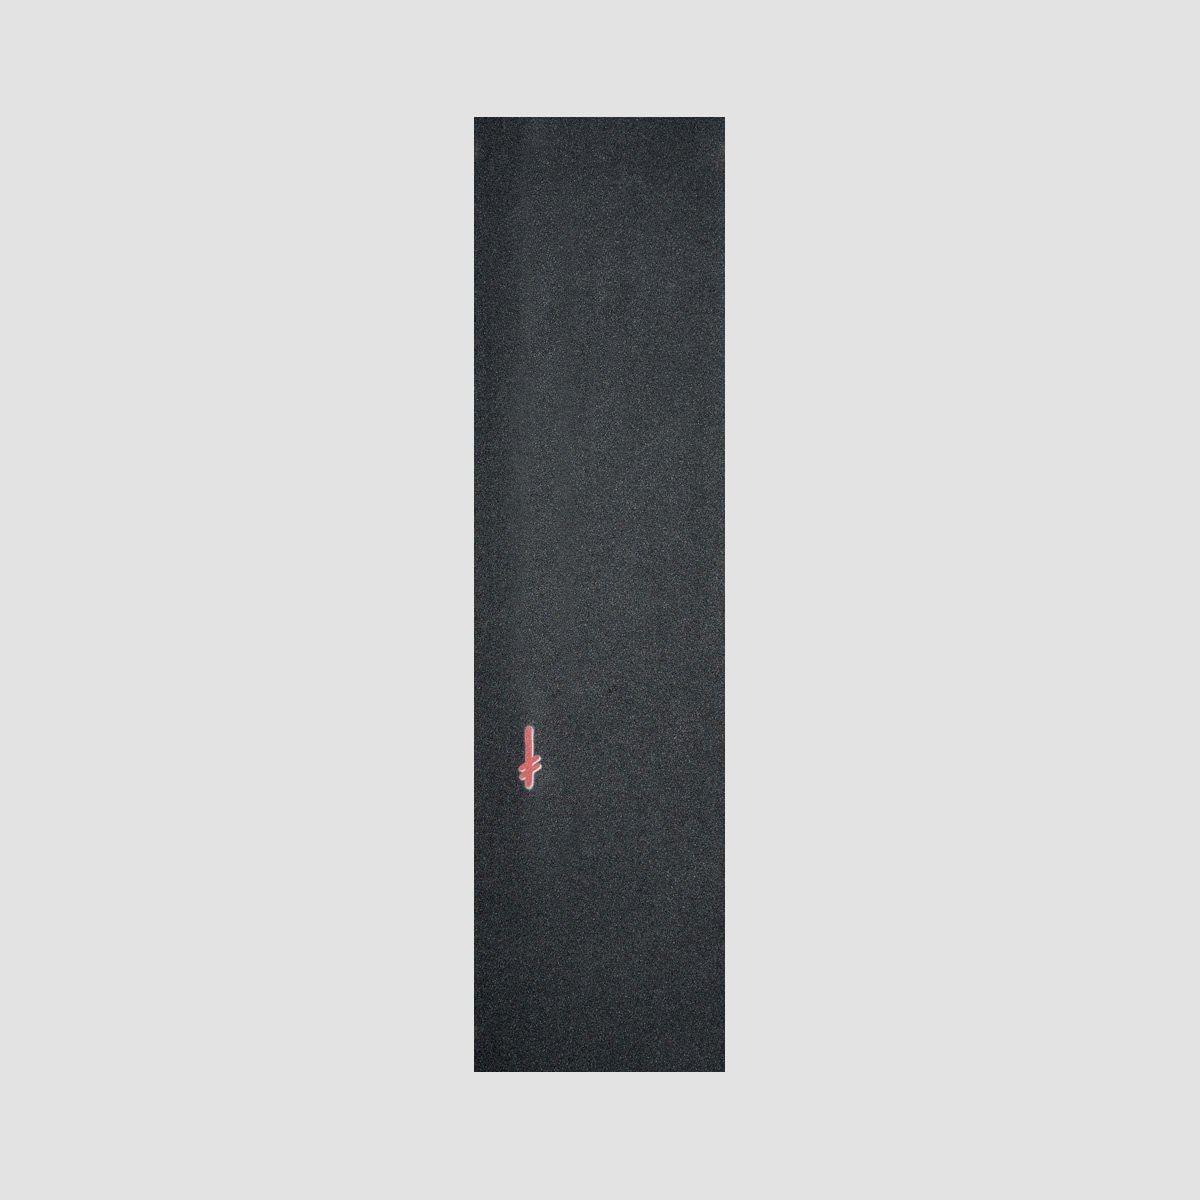 Red and Gray with an S' Logo - Deathwish Gang Logo Griptape Sheet Red/Black - rollersnakes.co.uk ...